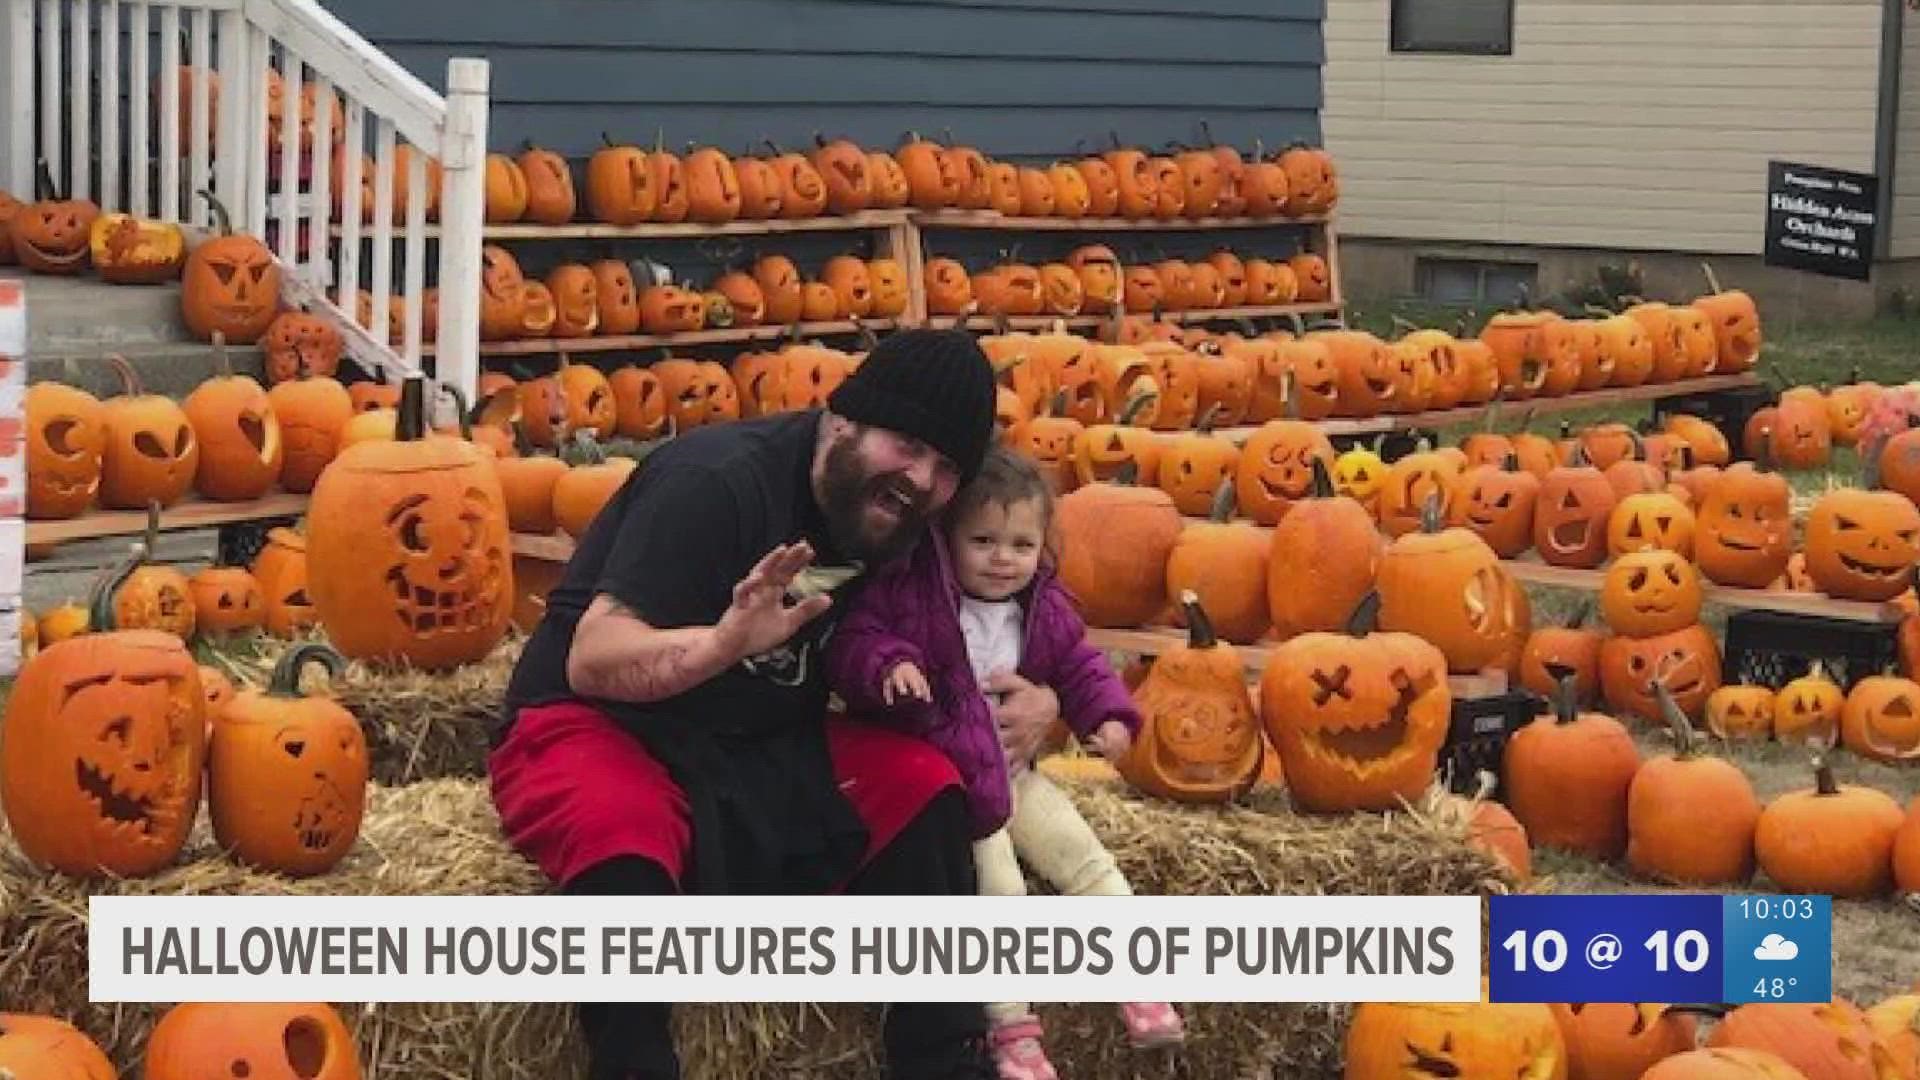 Spokane Pumpkin House wows residents with large display of creative